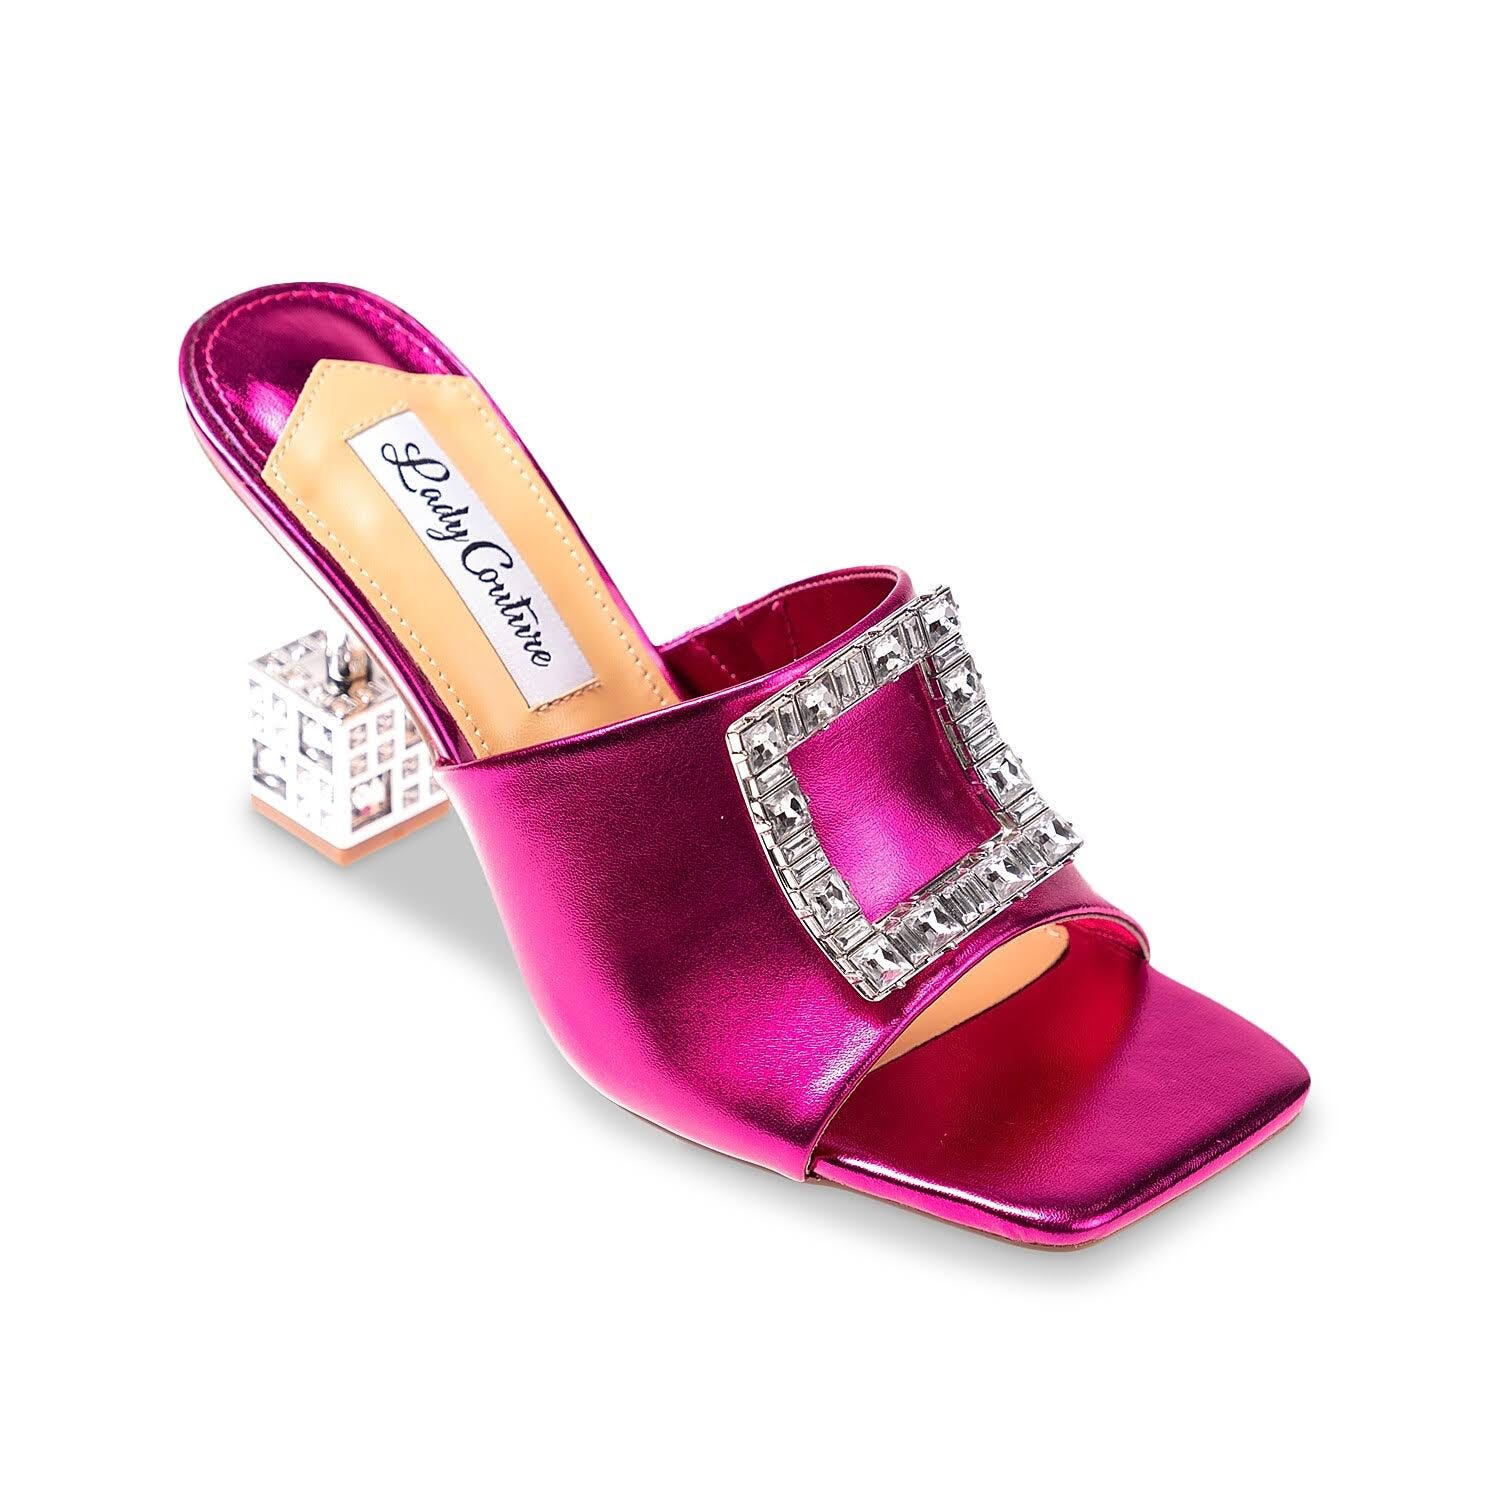 Lady Couture Fuchsia Sandals for Glamorous Nights | Image